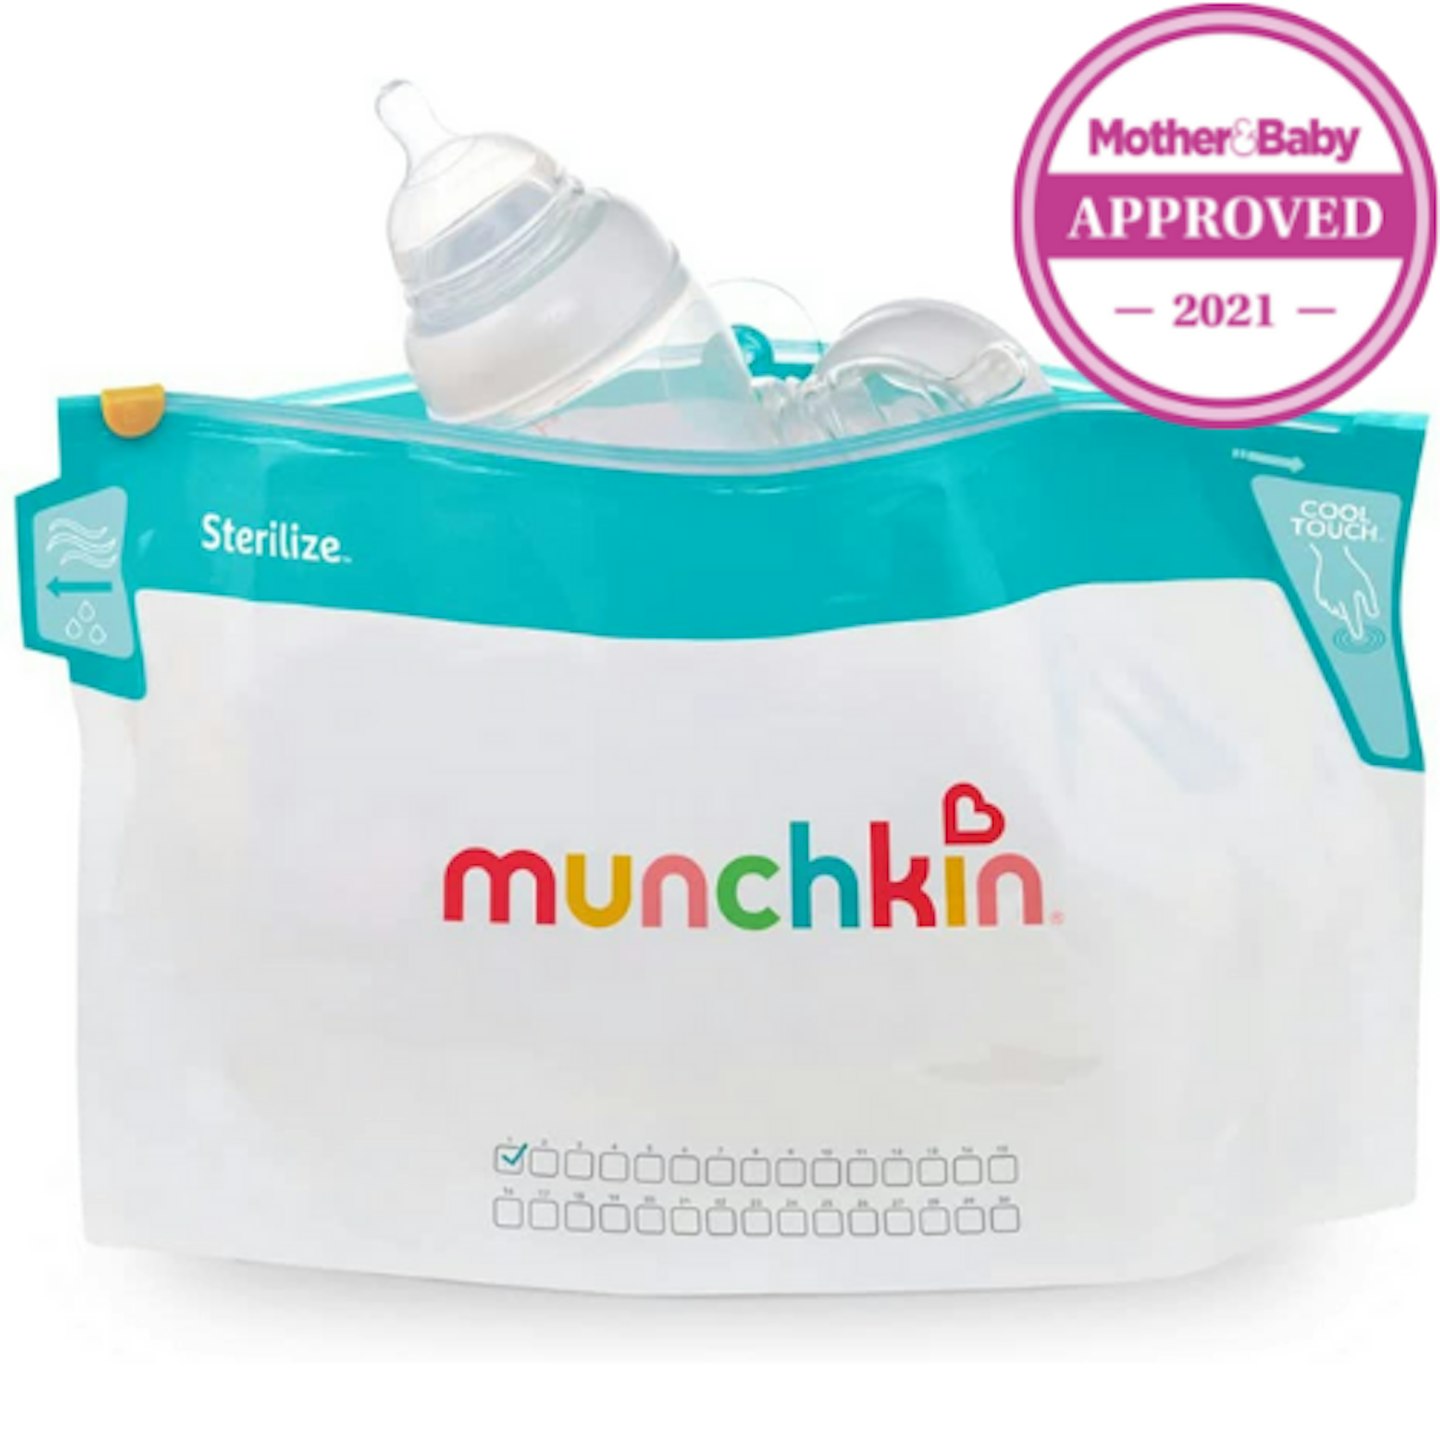 https://images.bauerhosting.com/affiliates/sites/12/motherandbaby/legacy/root/munchkin-cool-touch-microwave-steriliser-bags.png?auto=format&w=1440&q=80